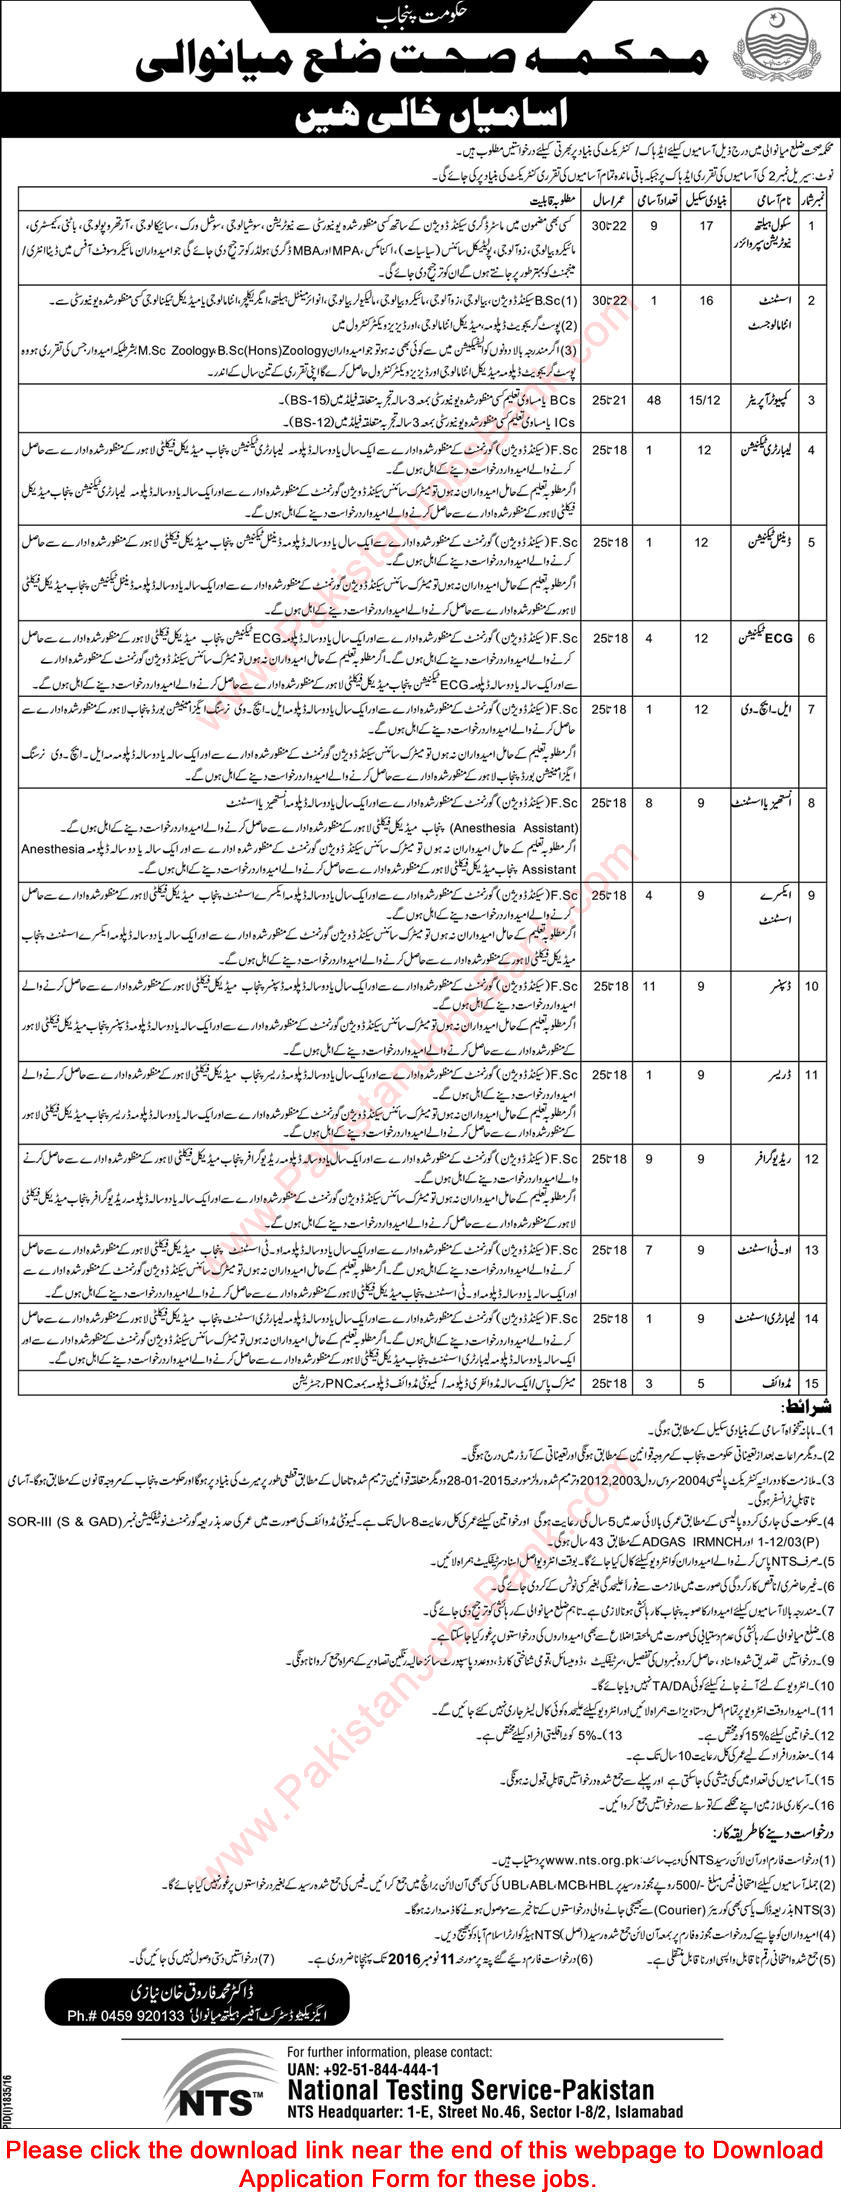 Health Department Mianwali Jobs October 2016 NTS Application Form Computer Operators, Dispensers & Others Latest